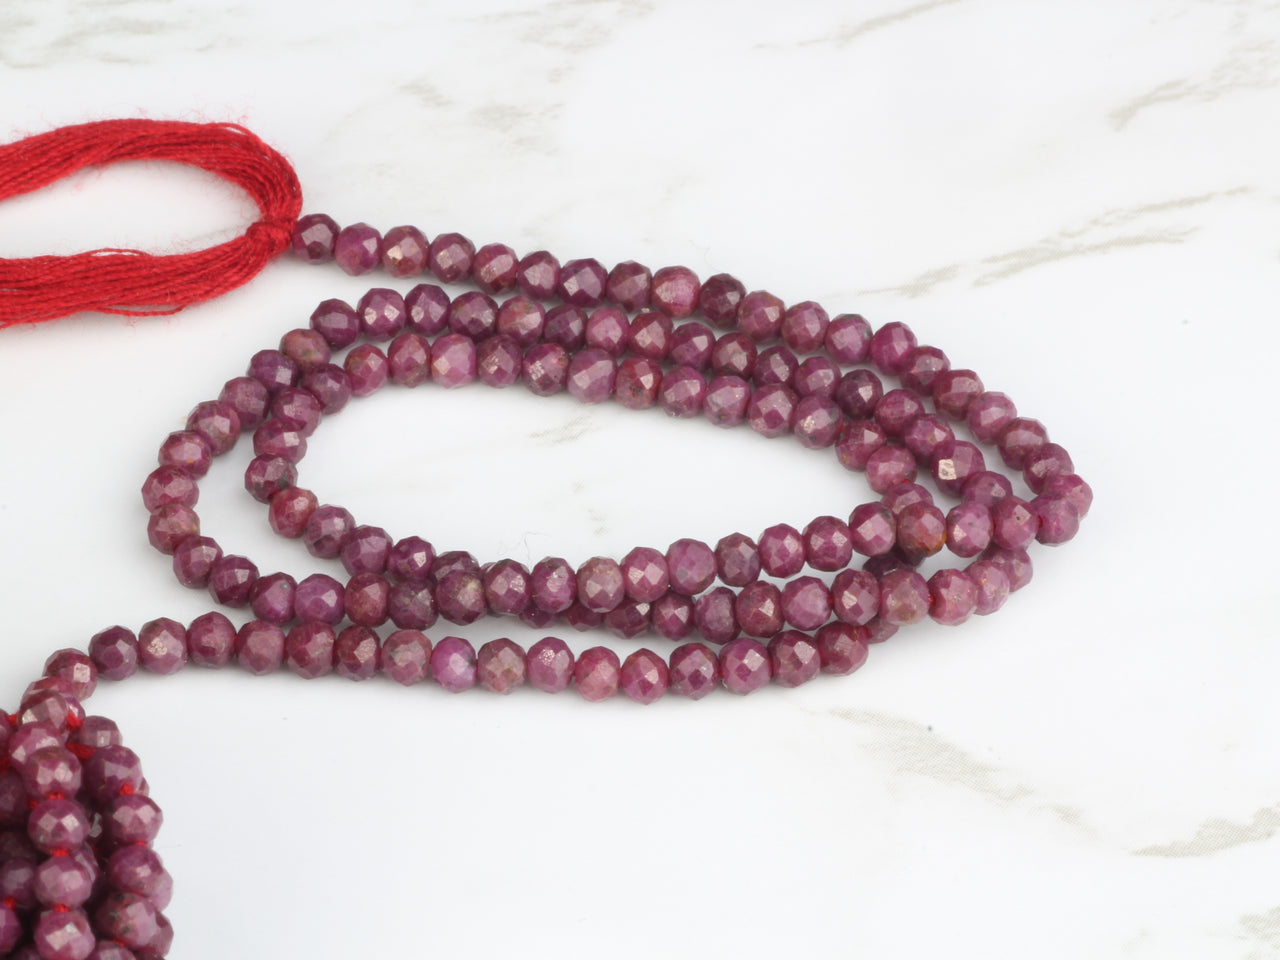 Red Ruby 3mm Faceted Rondelles Bead Strand